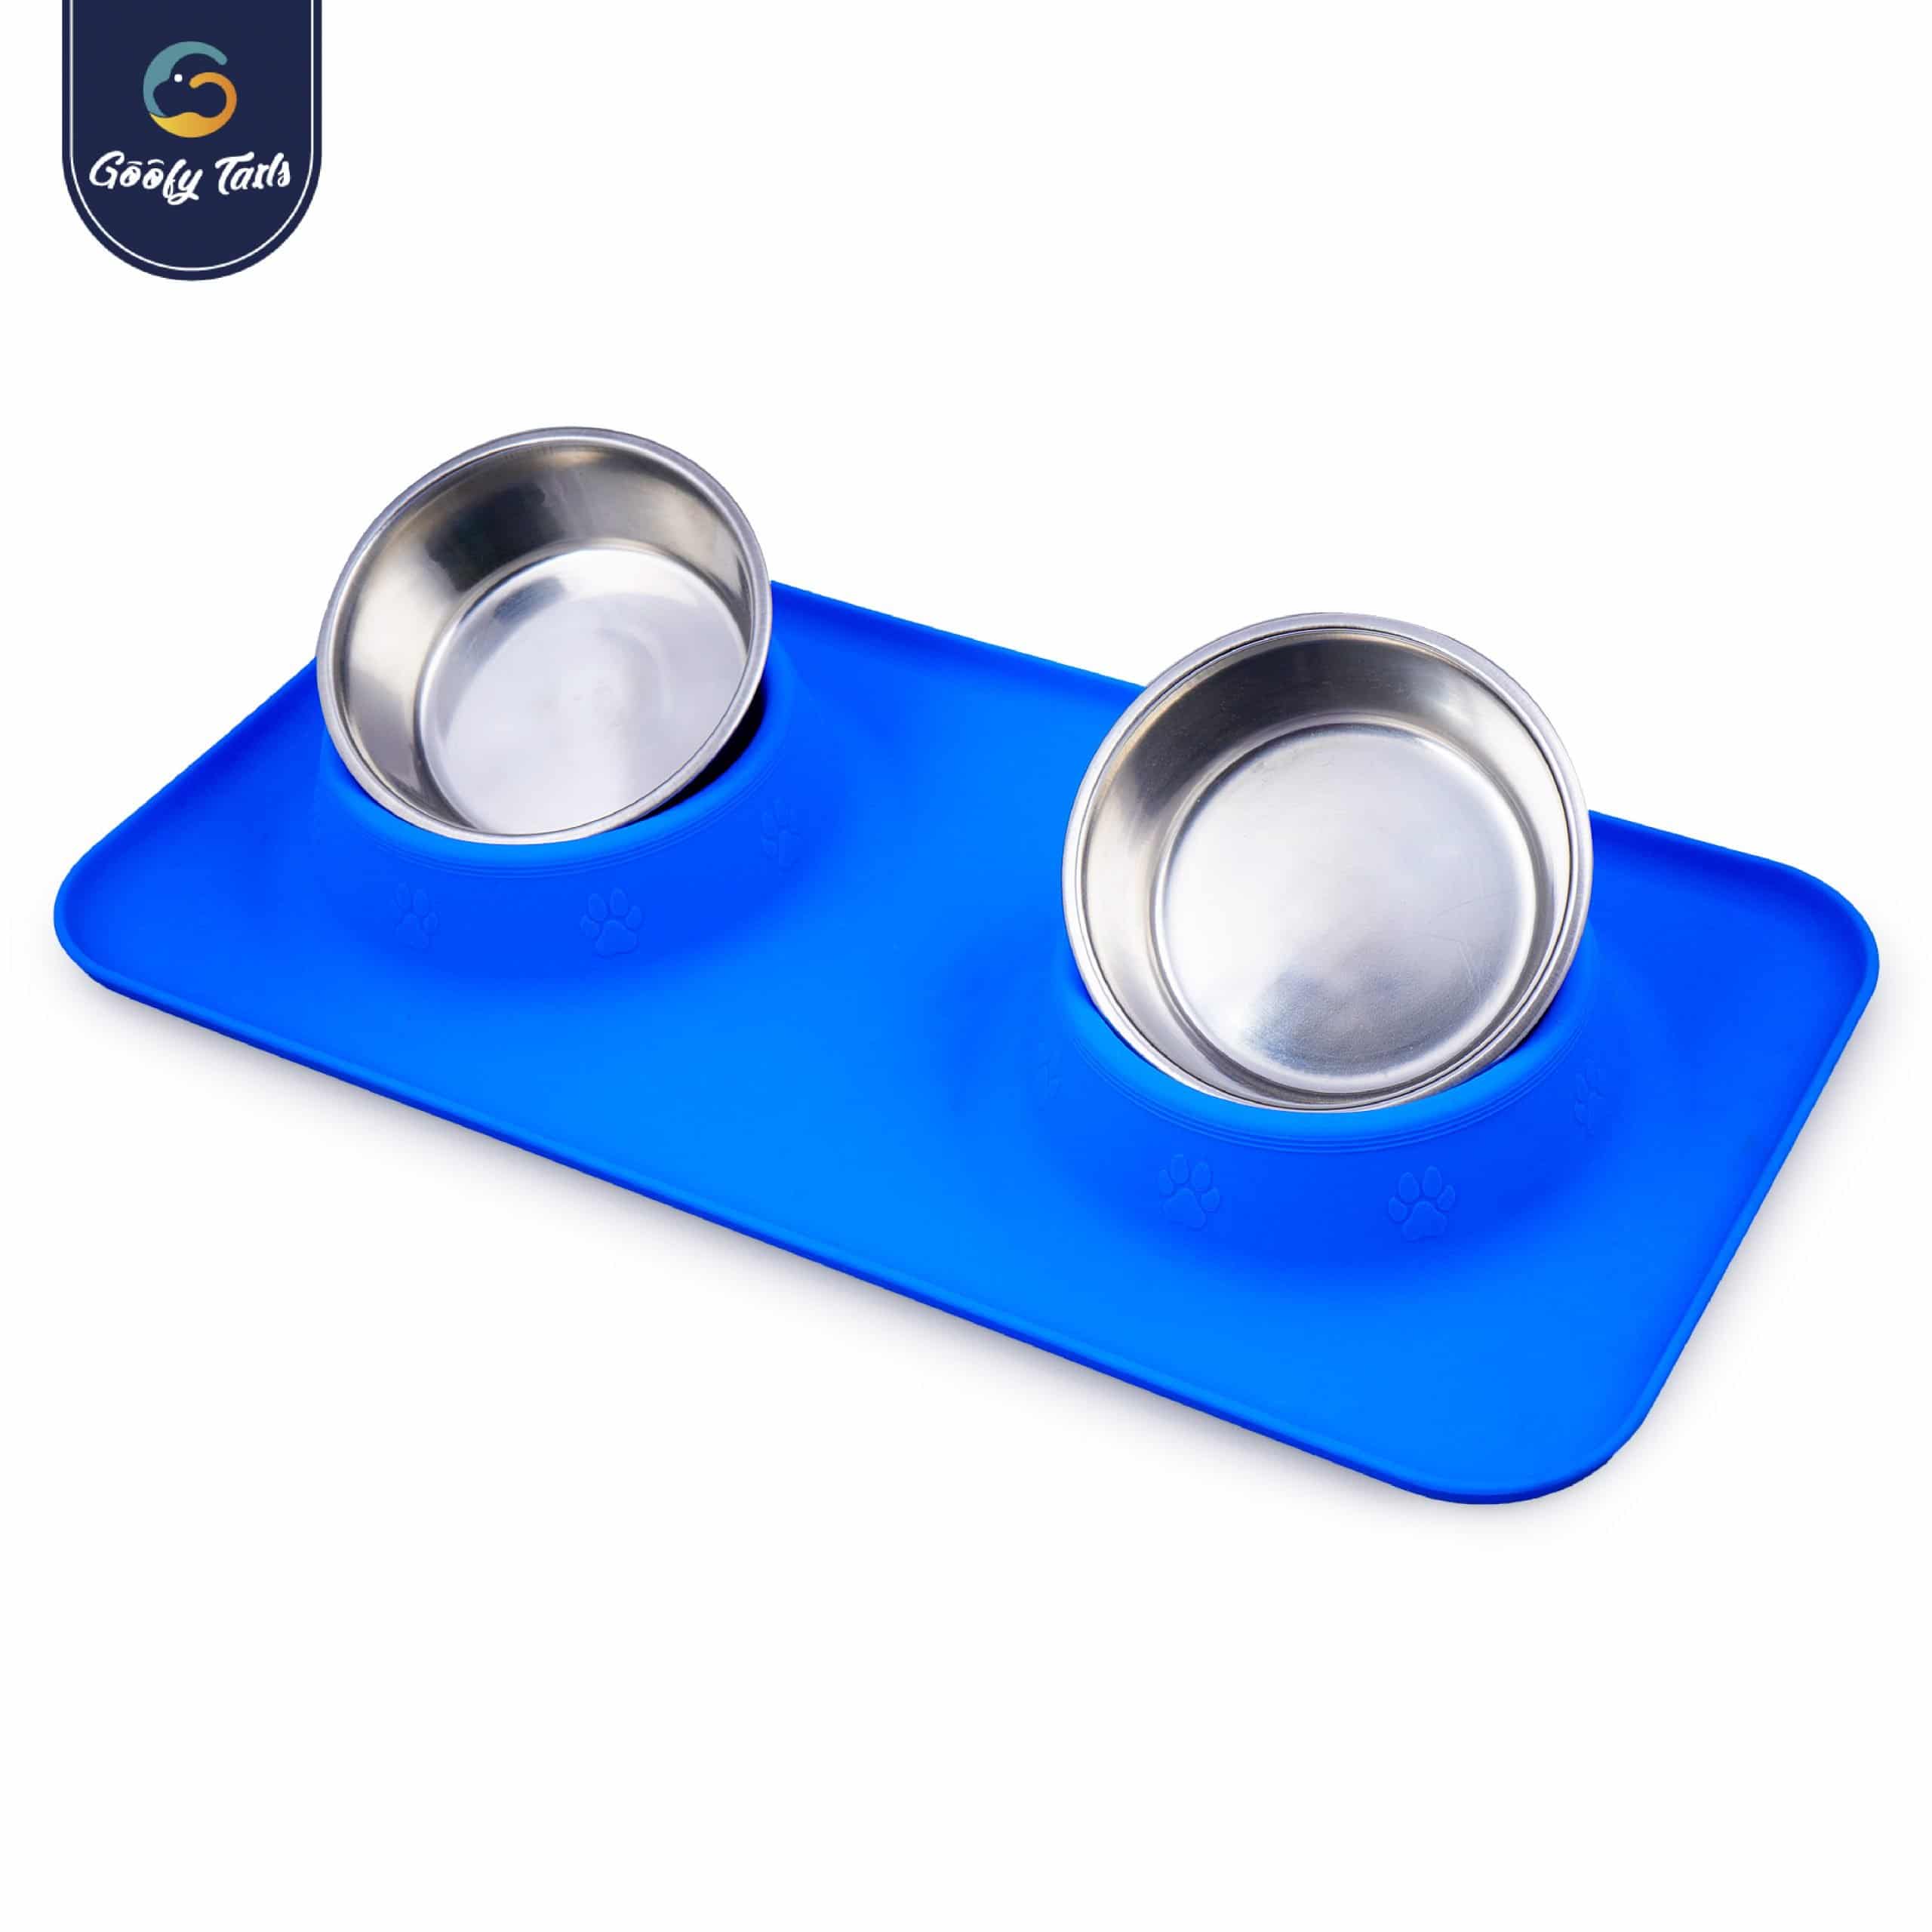 Goofy Tails Rectangle Silicone Double Dinner with Stainless Steel Food Bowl For Dogs (Blue) (7168224297110)